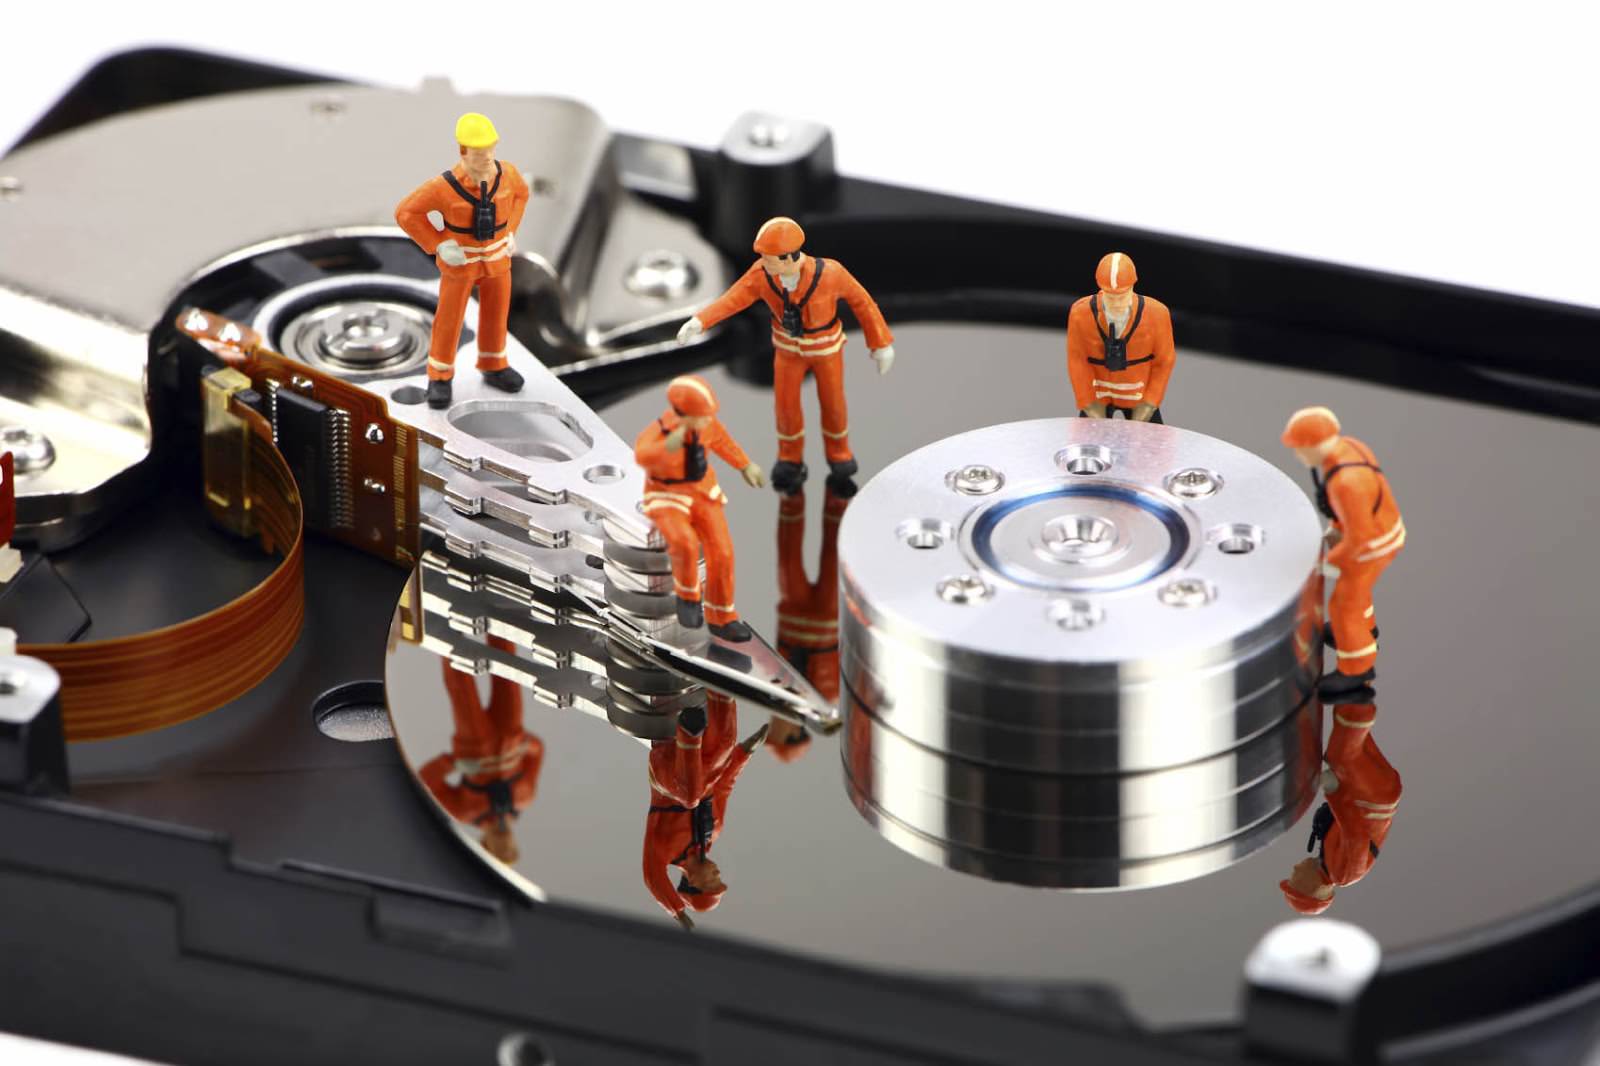 Data Recovery Services From Deleted Files And Data